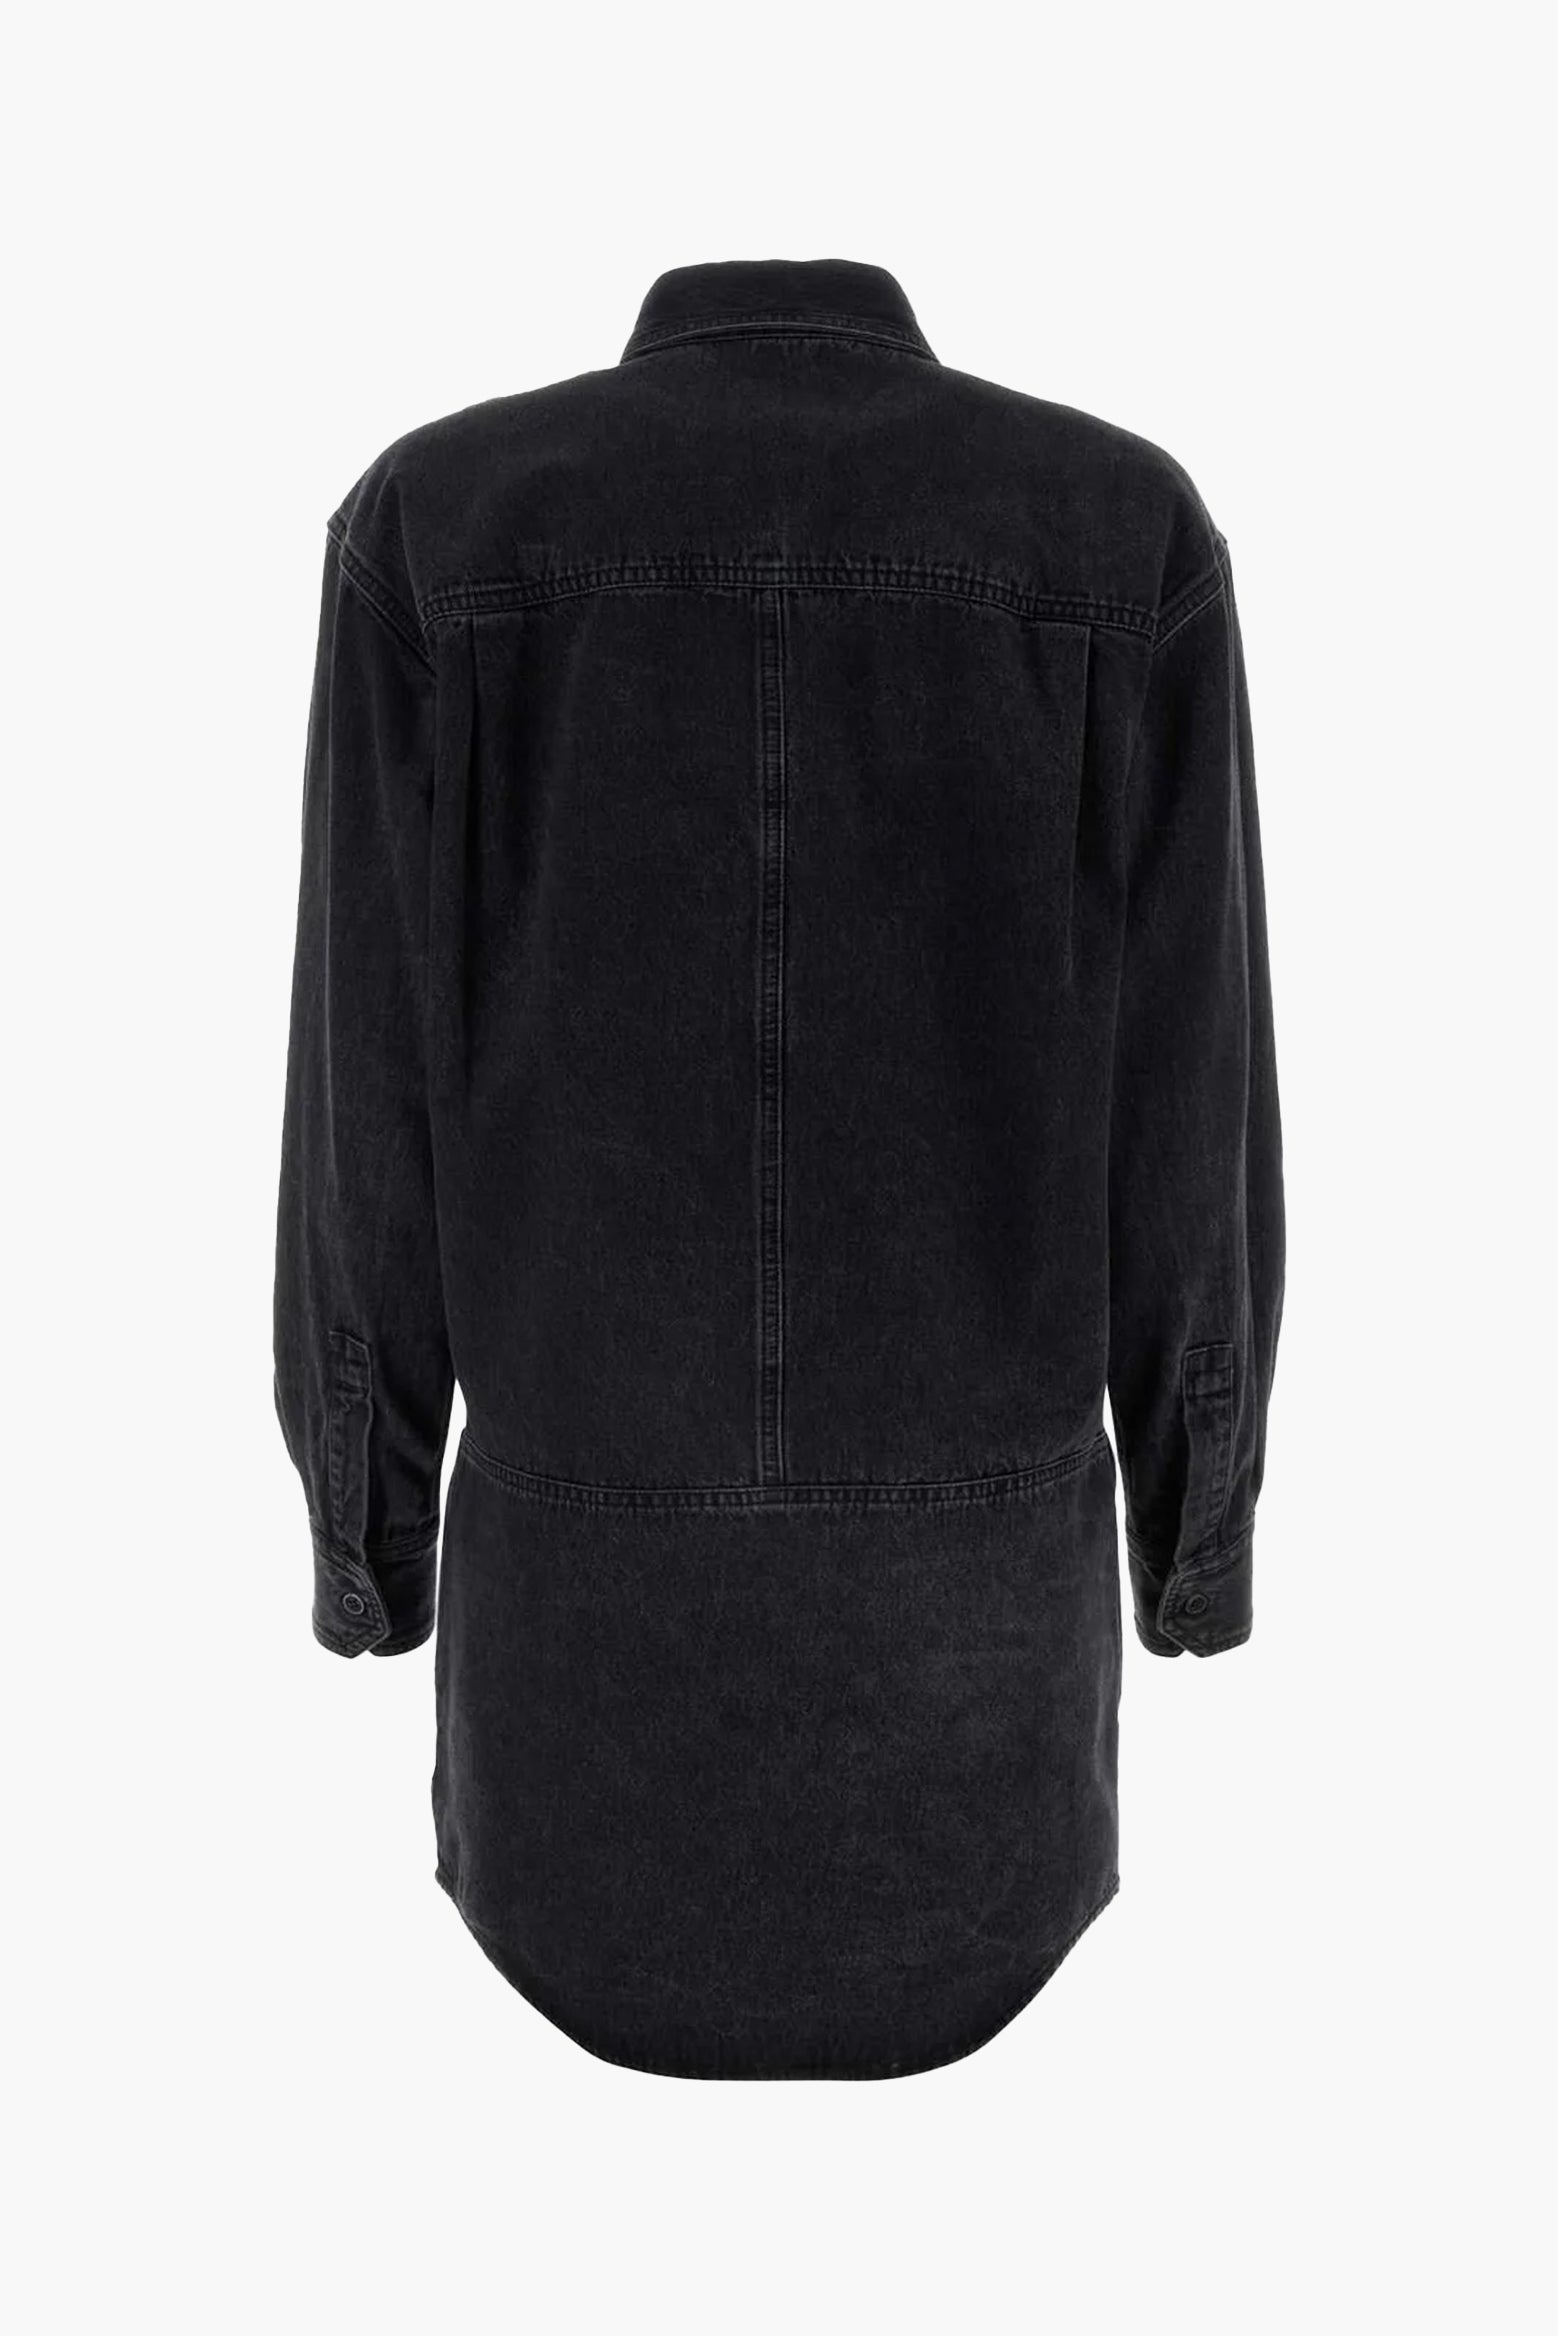 The Isabel Marant Ilaya Dress in Faded Black from The New Trend.